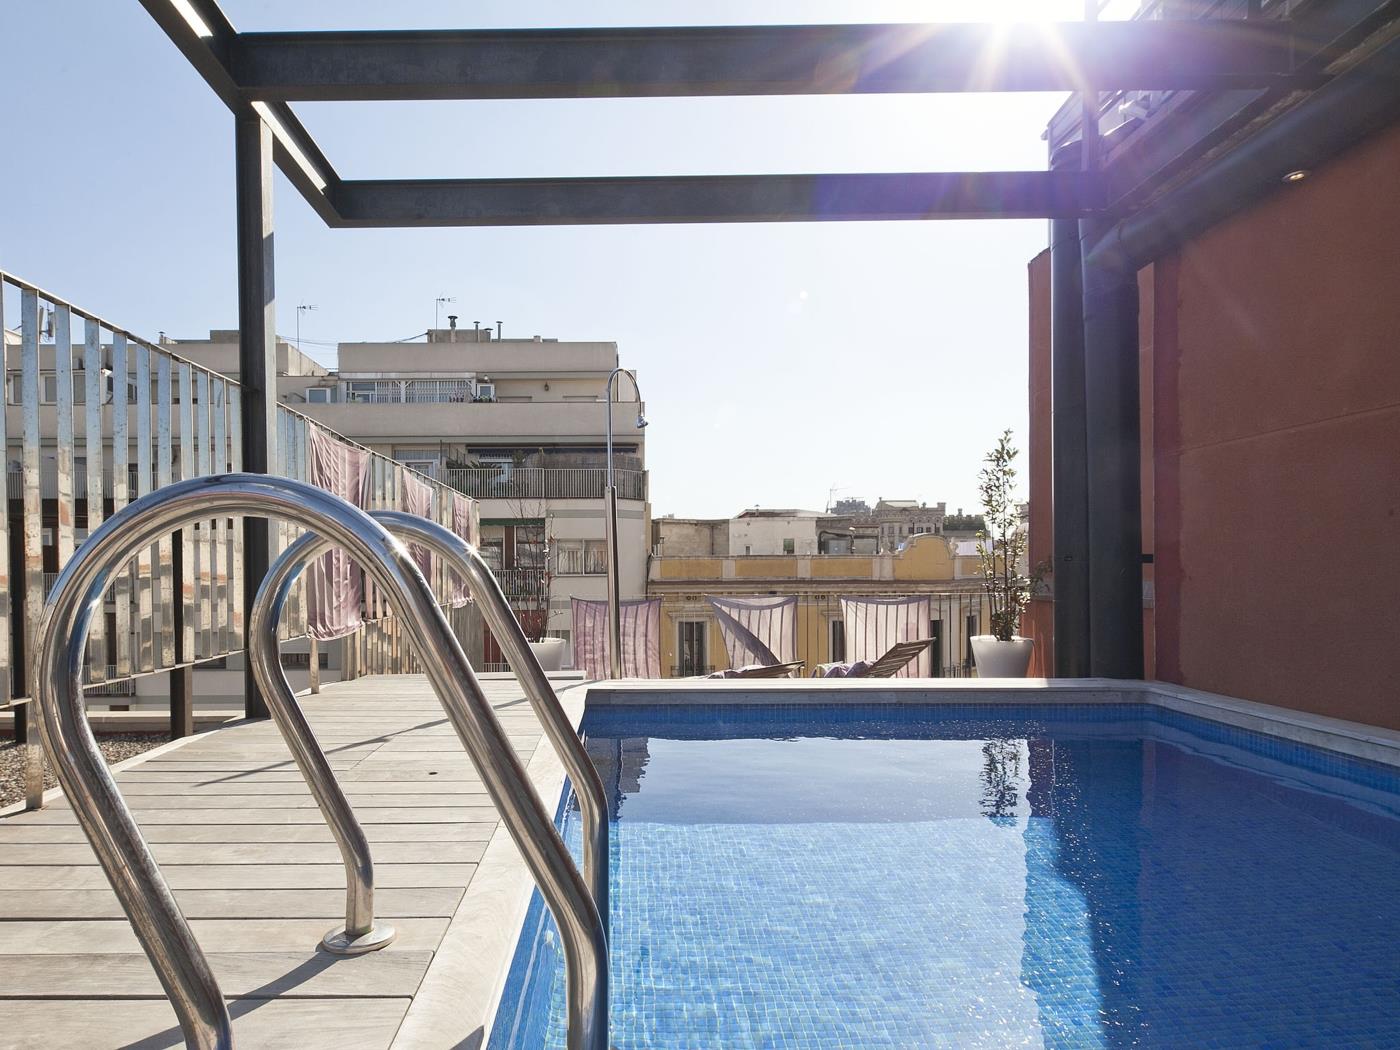 Swimming Pool Apartment near the Born - My Space Barcelona Aпартаменты